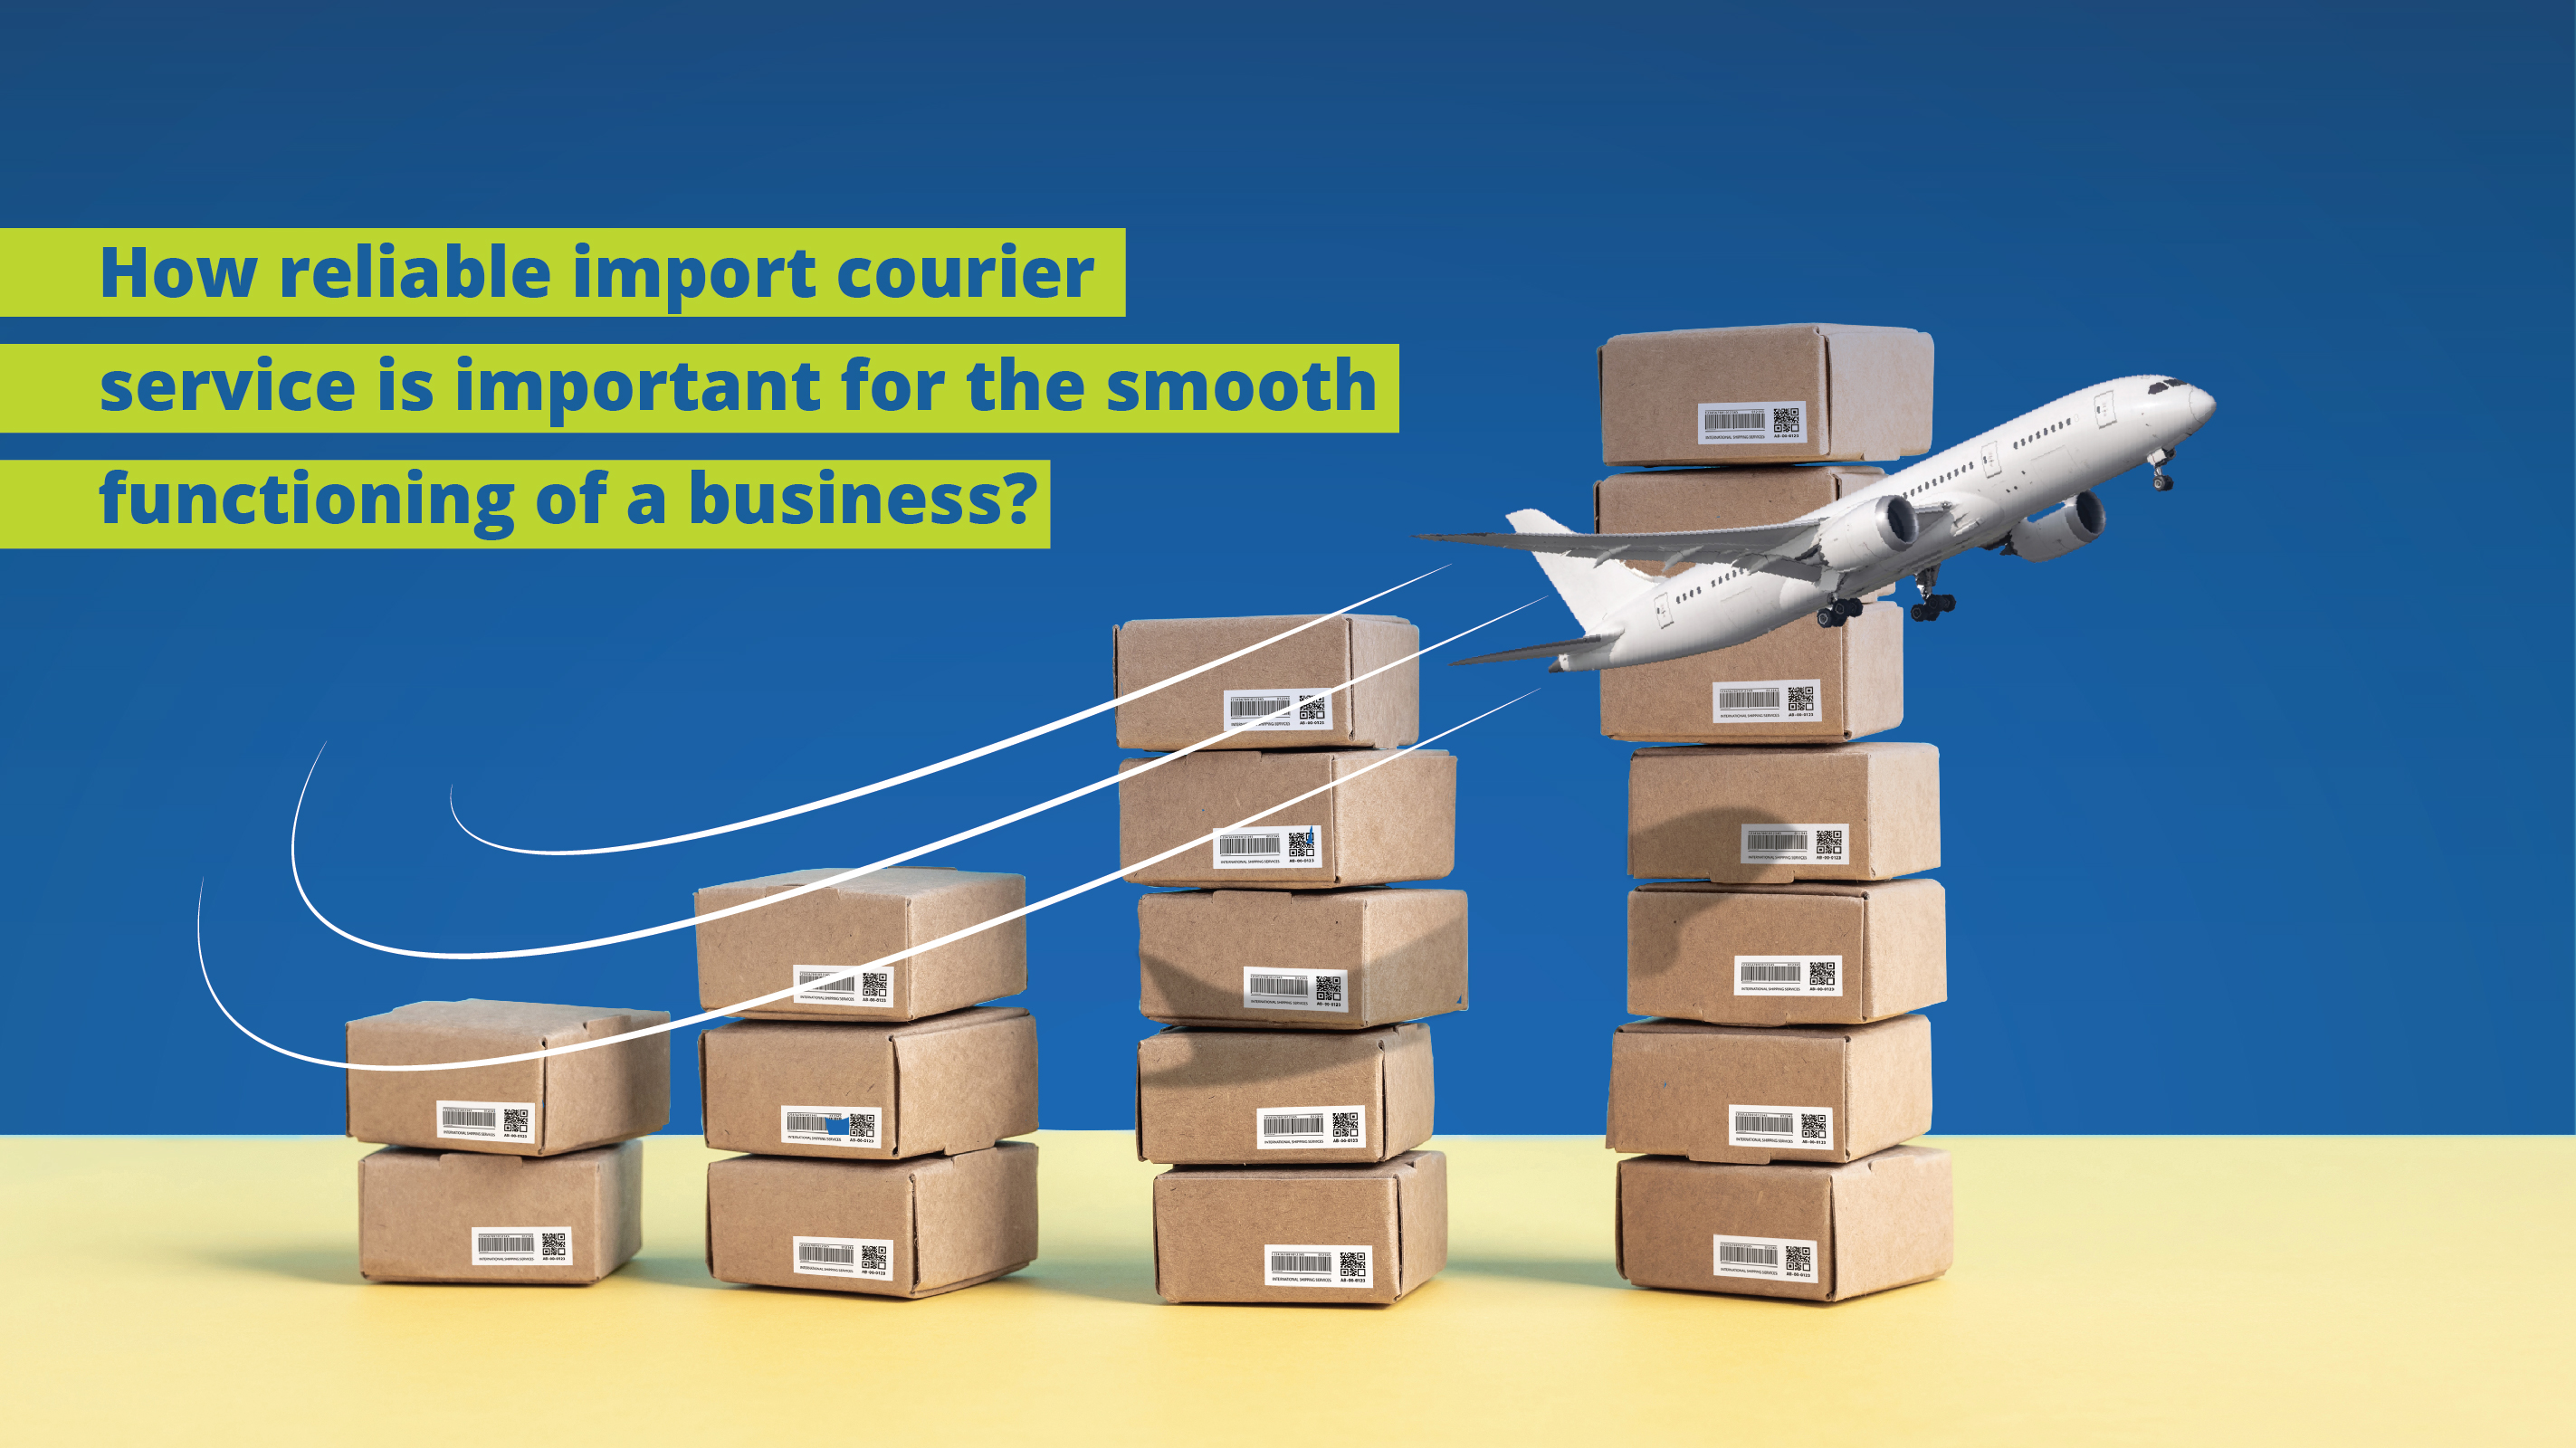 How reliable import courier service is important for the smooth functioning of a business